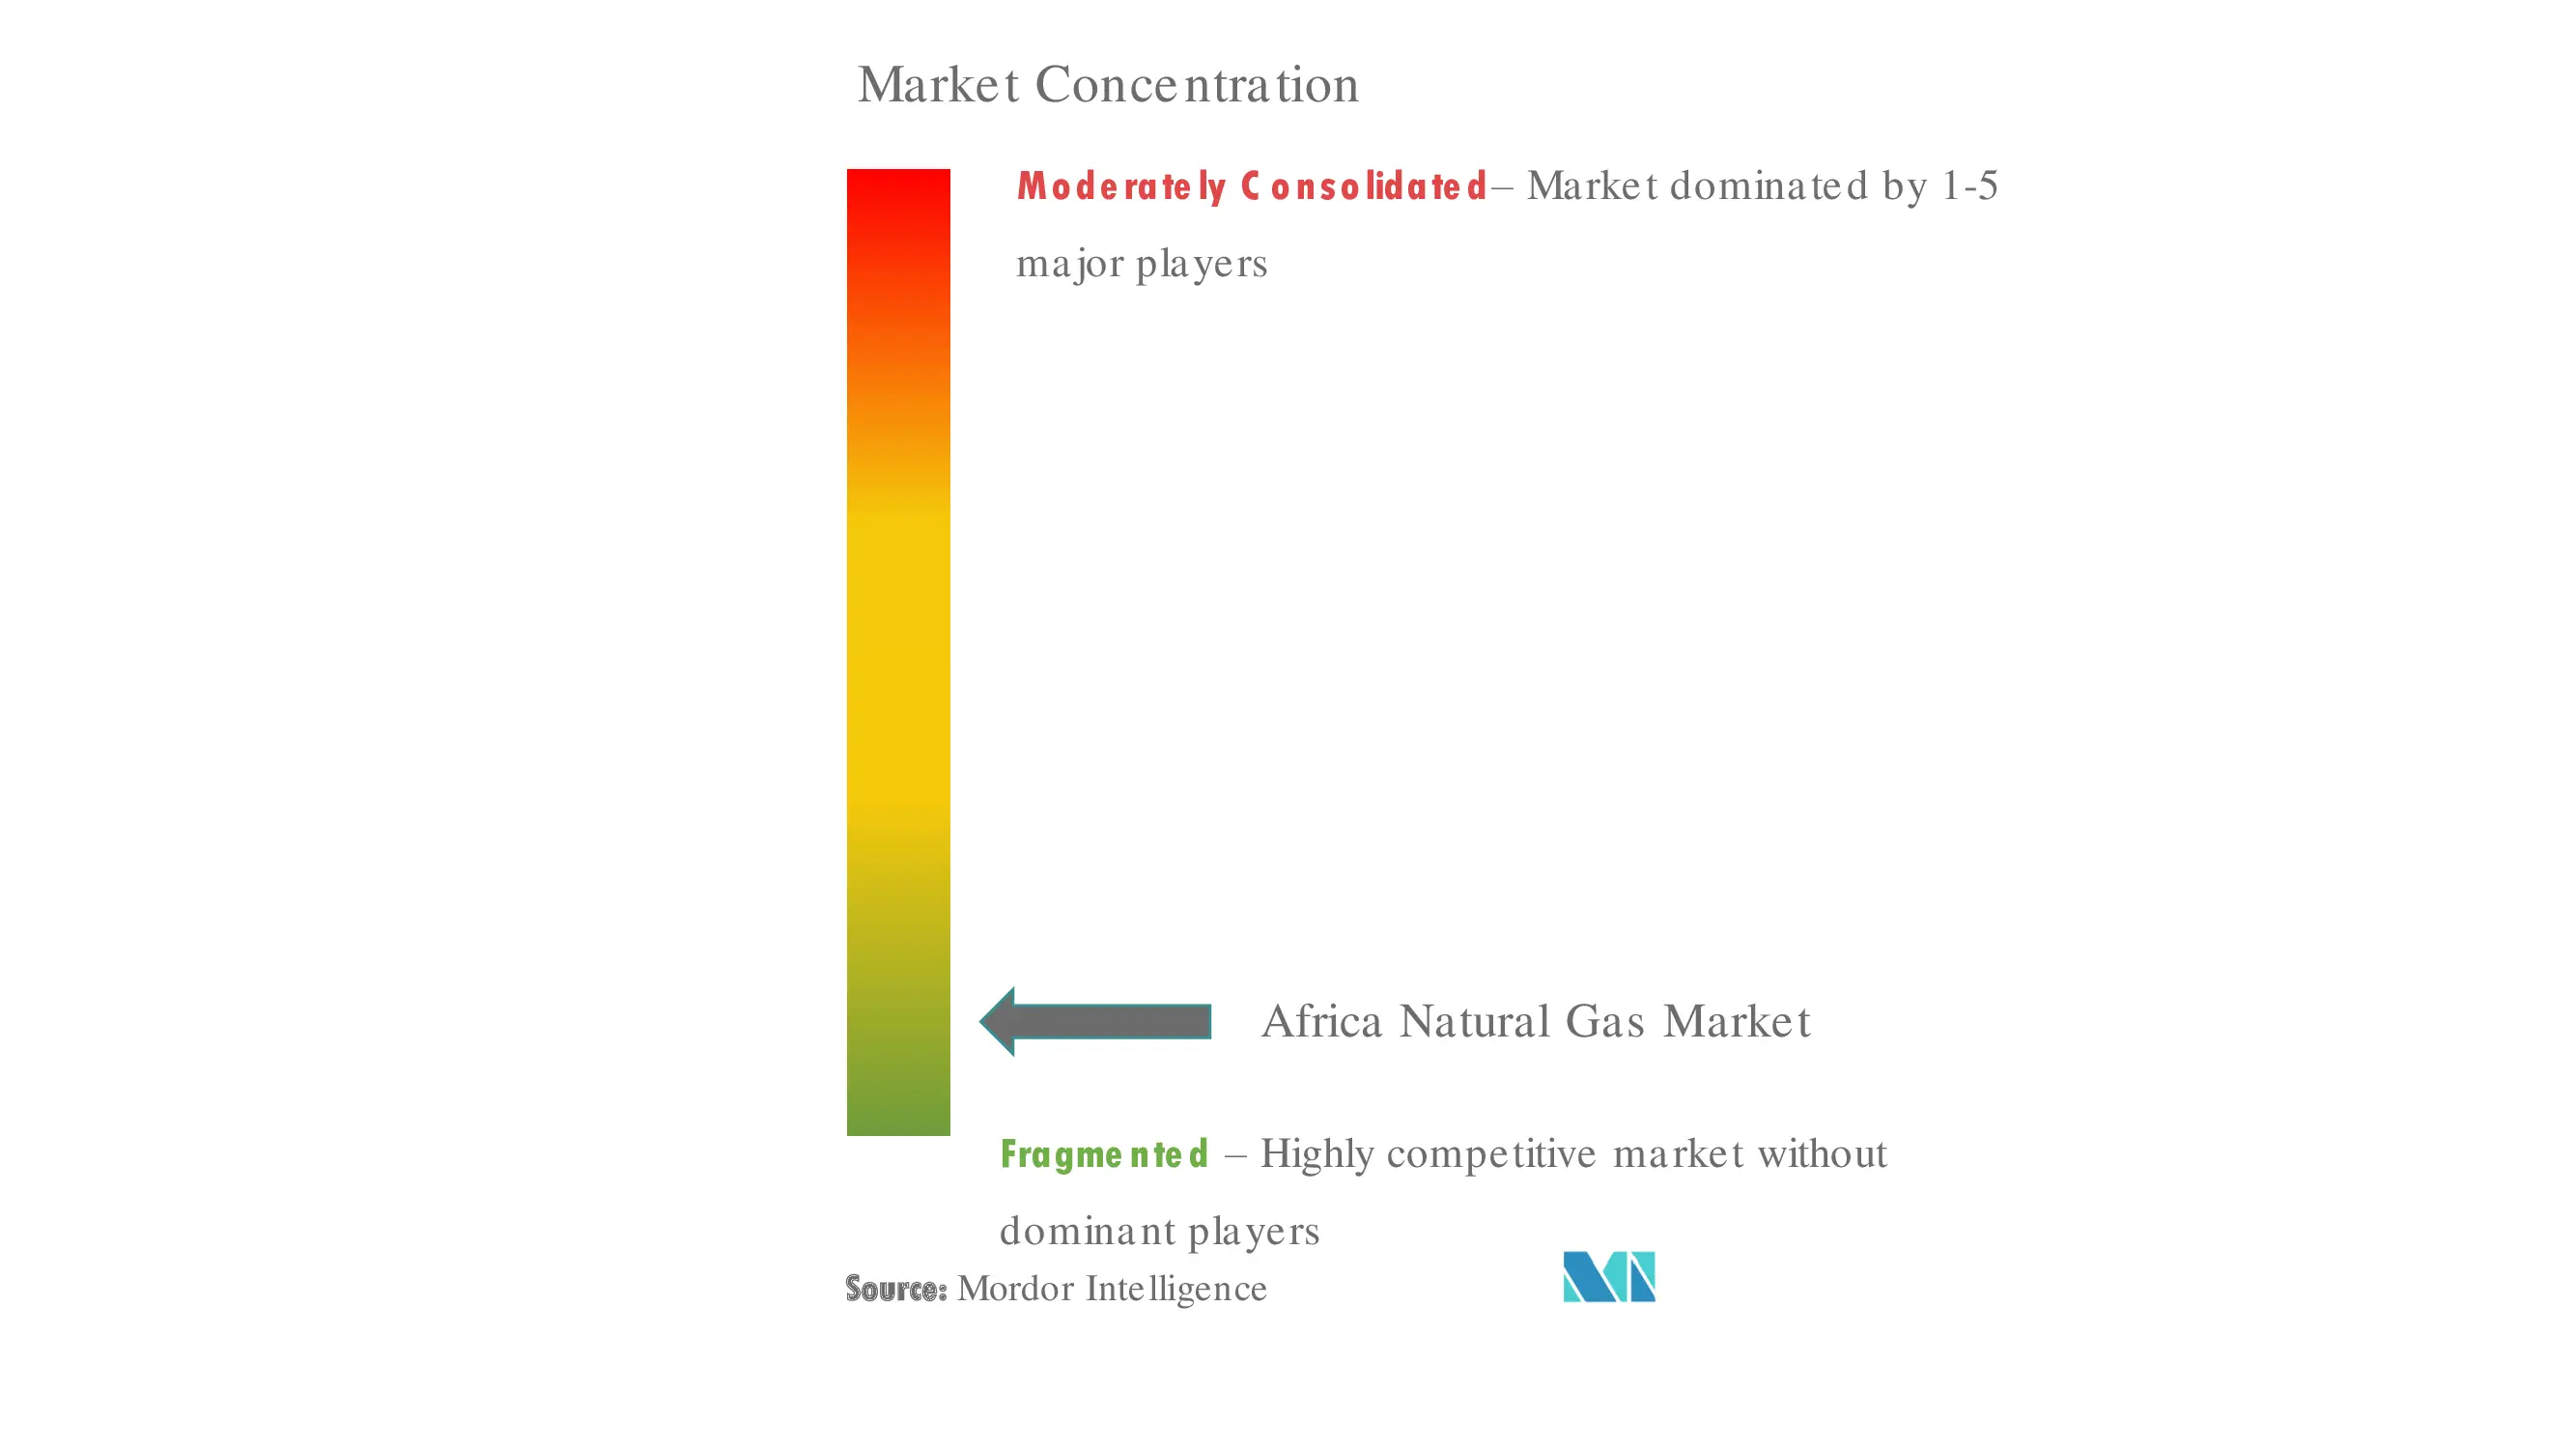 Africa Natural Gas Market Concentration